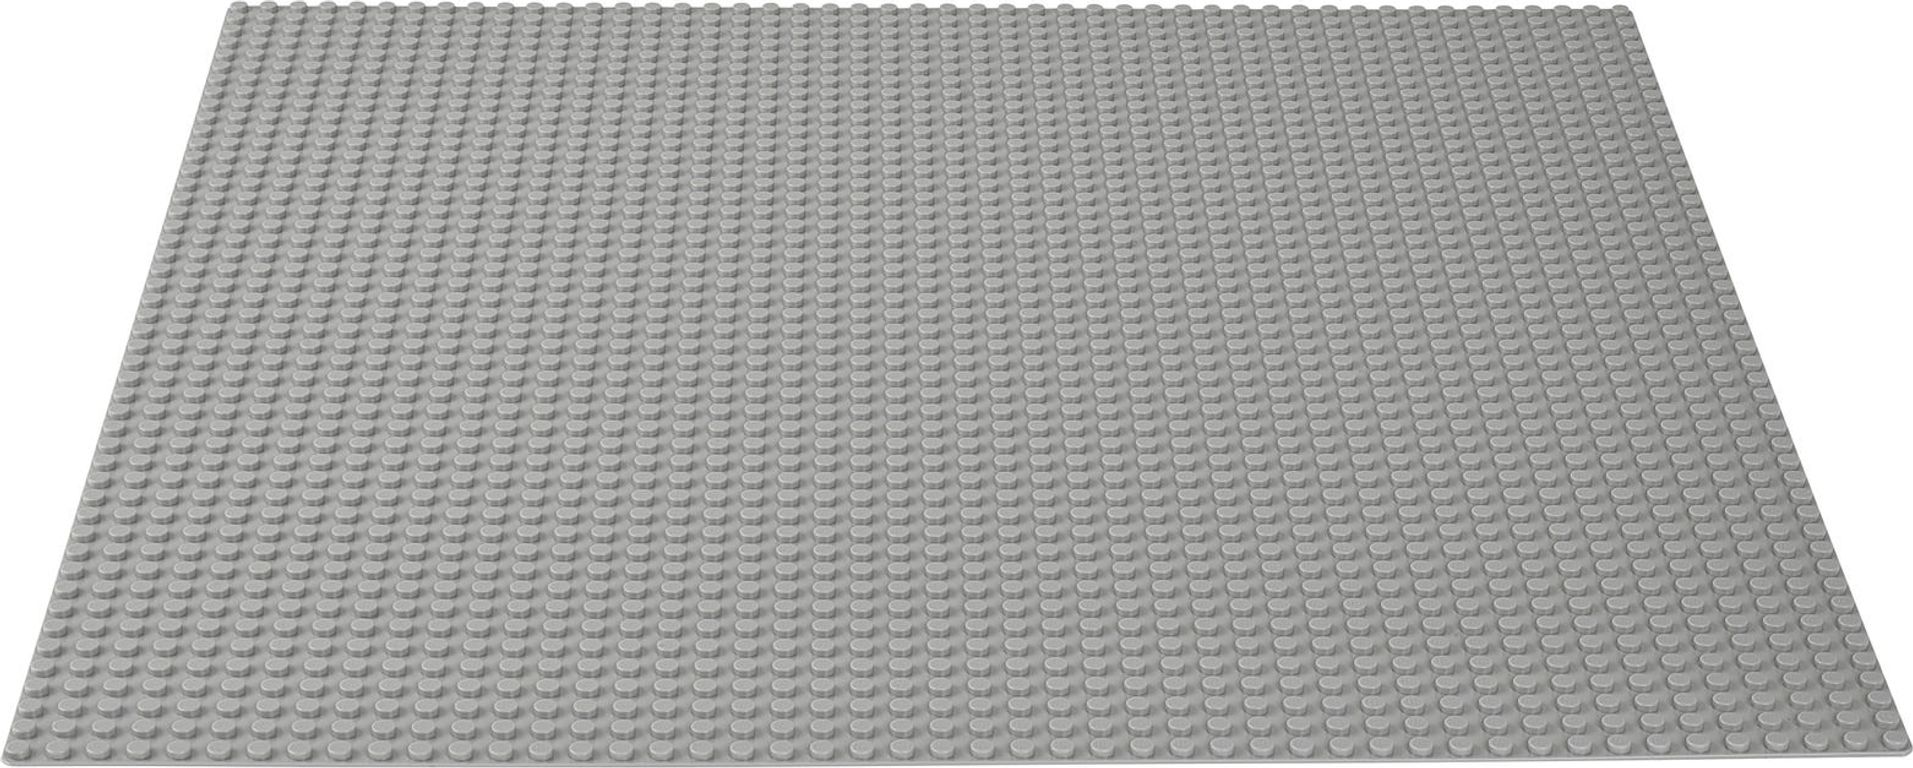 LEGO® Classic Gray Baseplate components